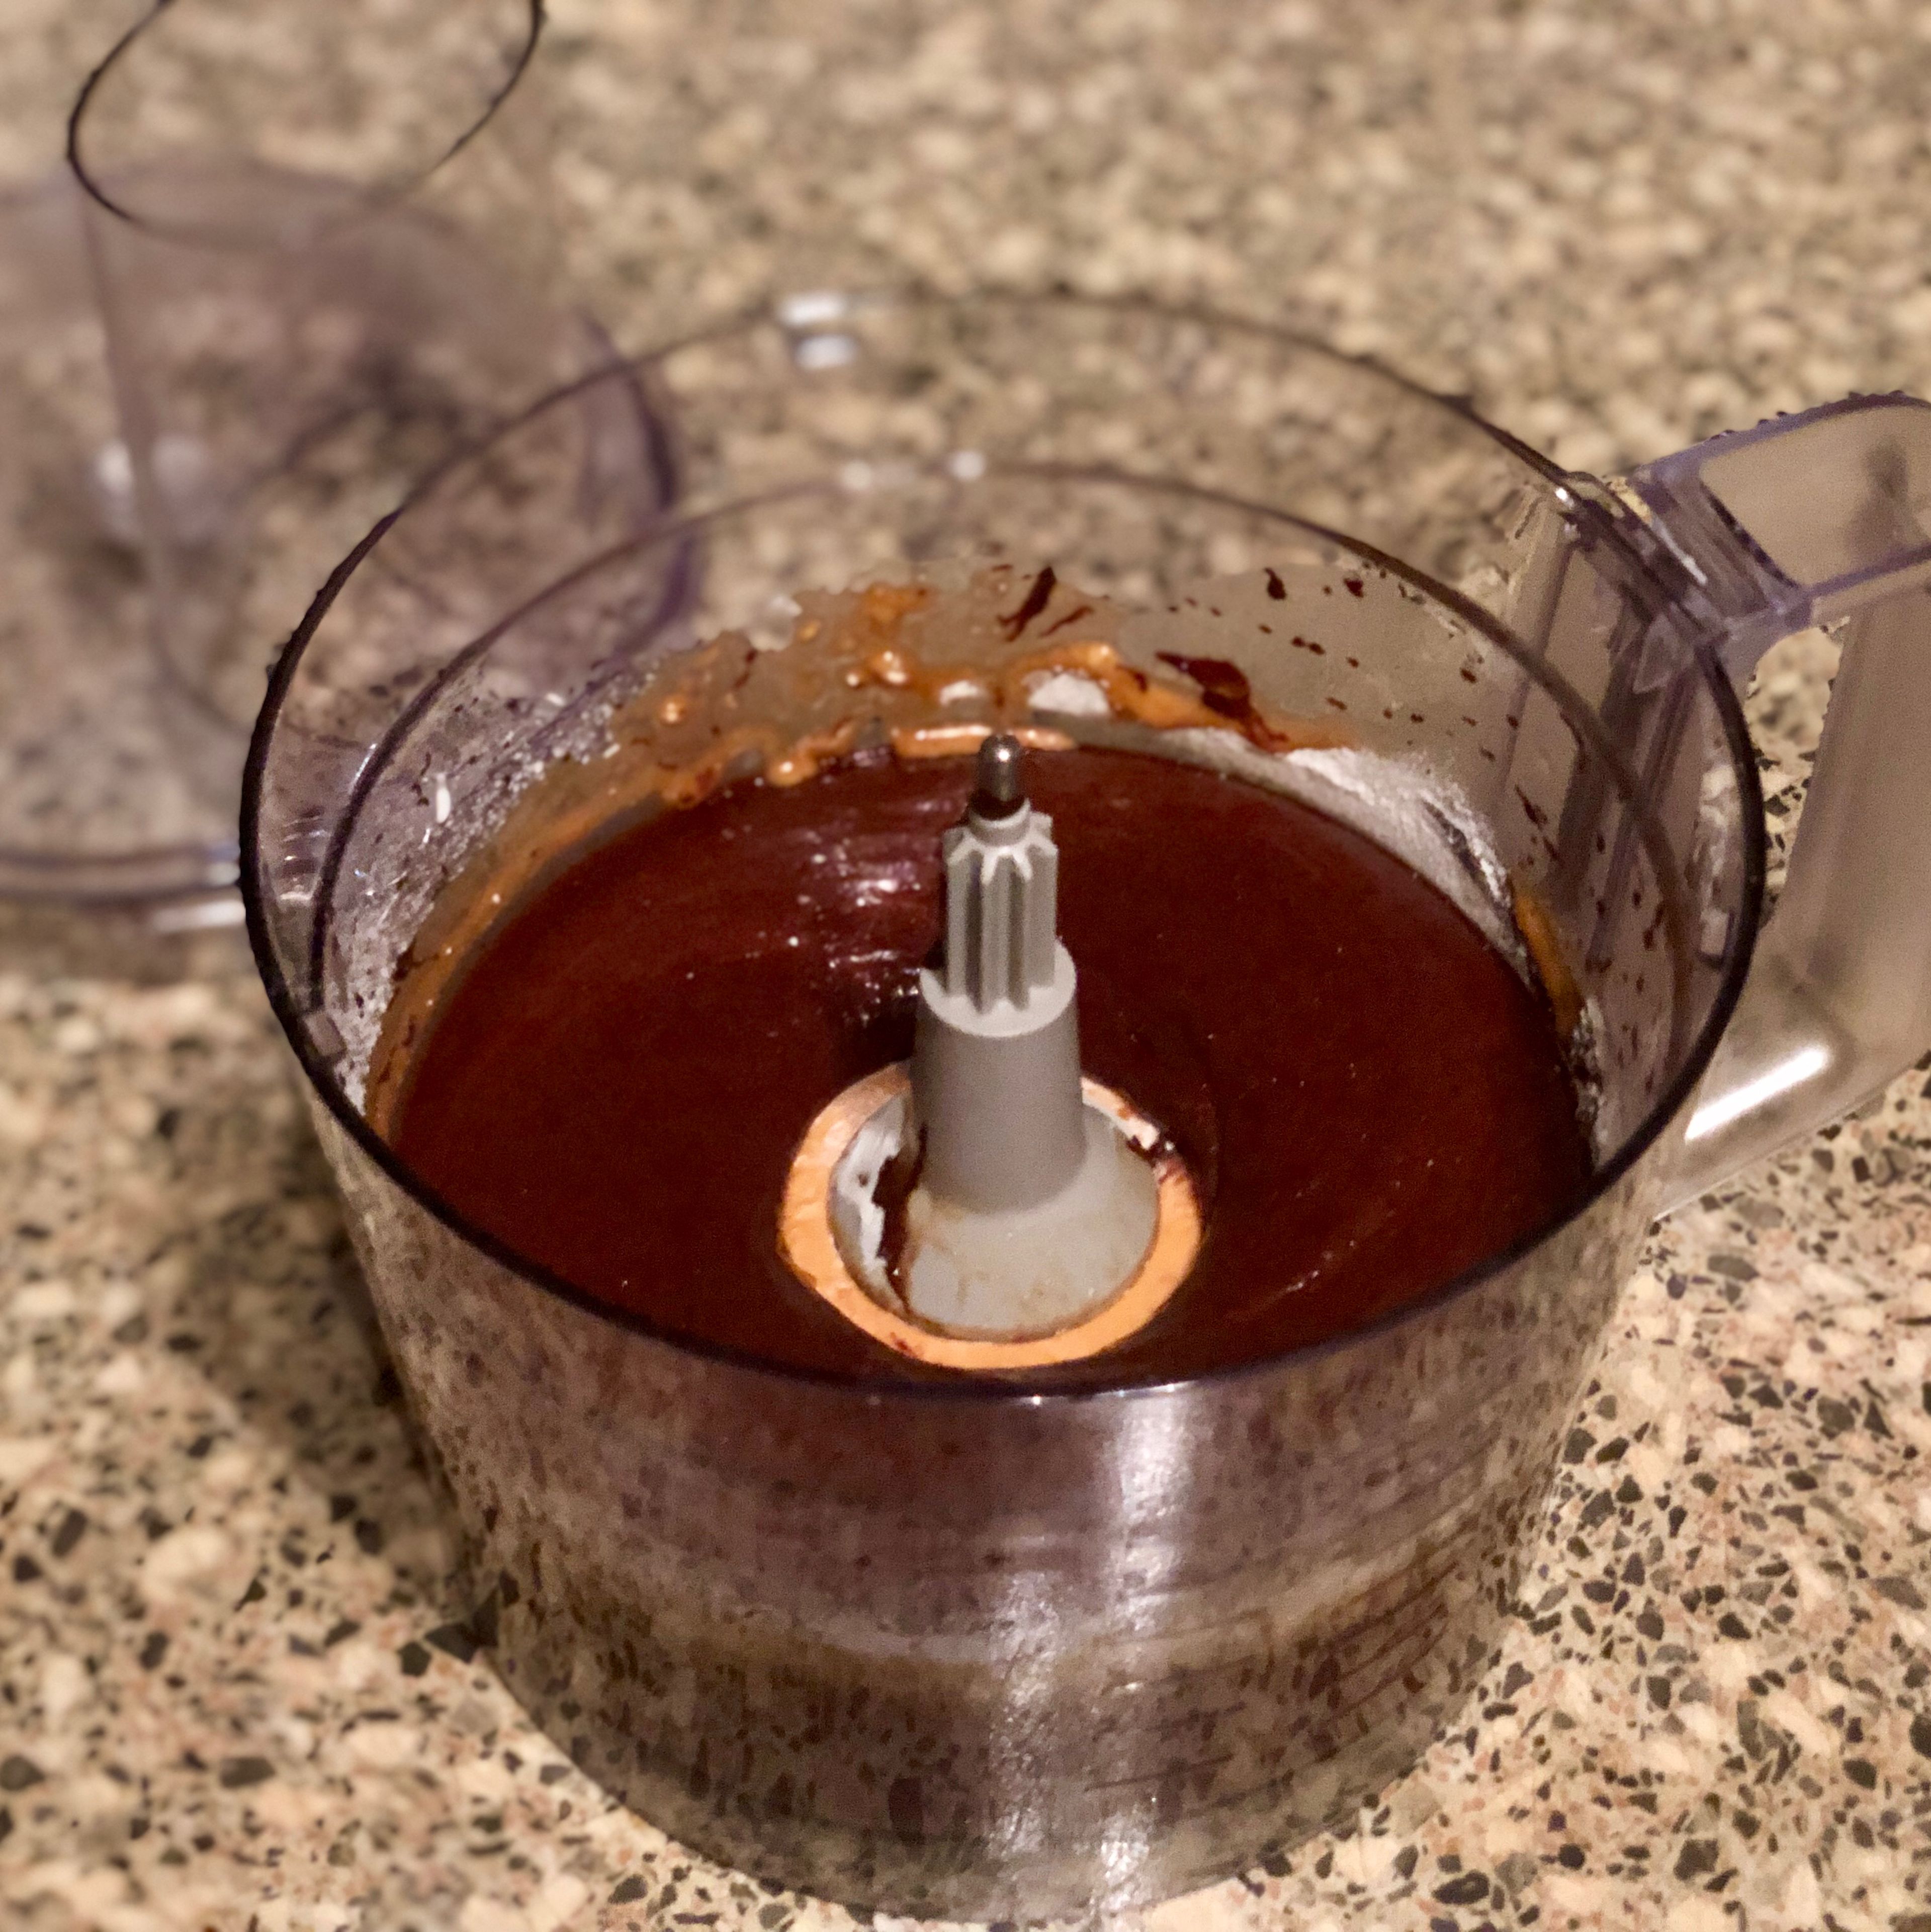 Eggs, sugar, olive oil, salt, vanilla extract, baking powder, flour and already melted chocolate combine in a food processor. Whizz until evenly mixed into a cake batter.